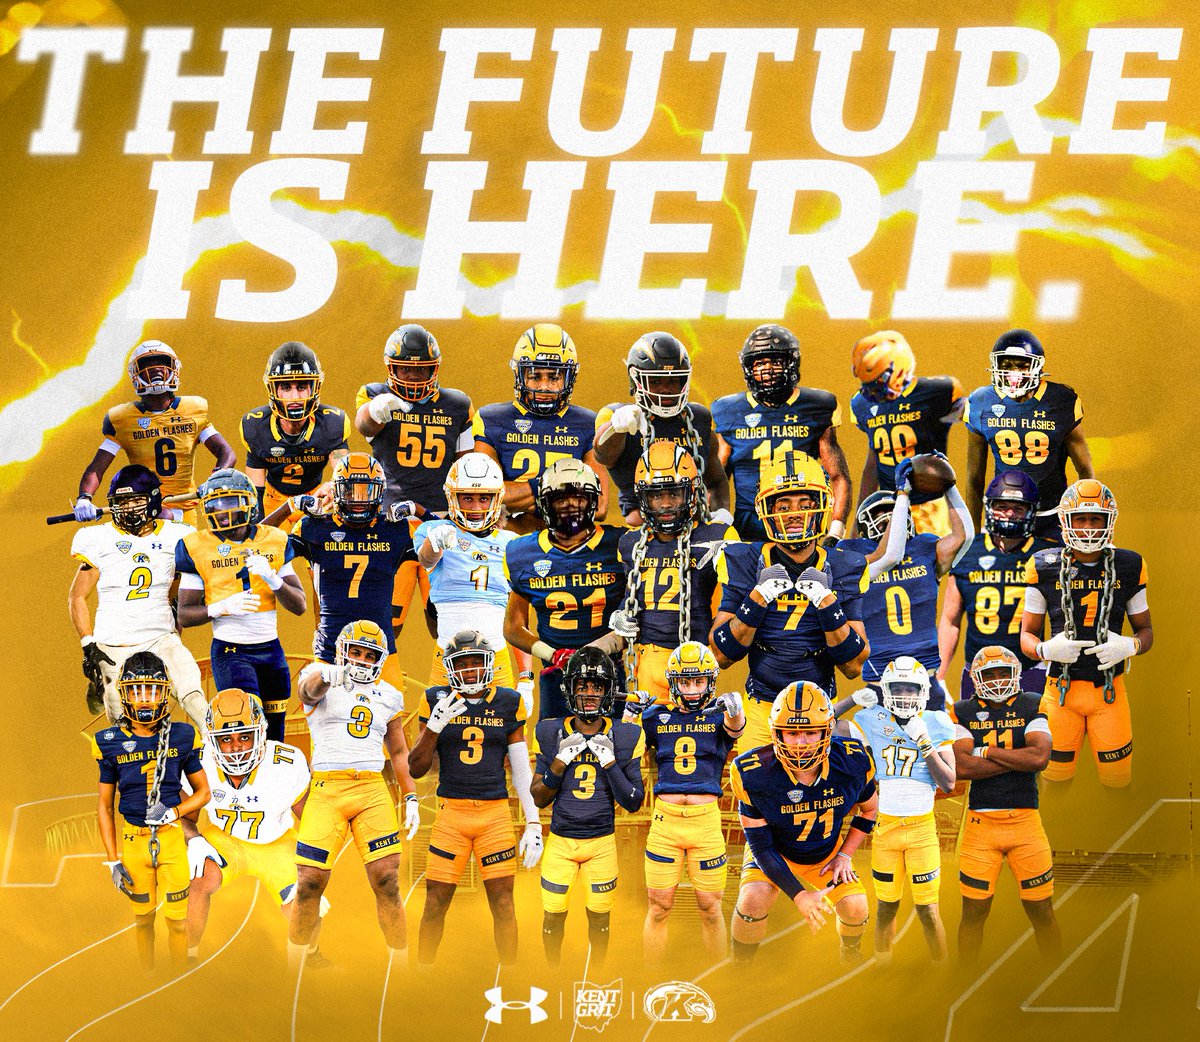 The future of the KentGRIT Era continues to look brighter. ⭐️ We are here and we are ready to get to work. 💪🏈 #KentGRIT⚡️